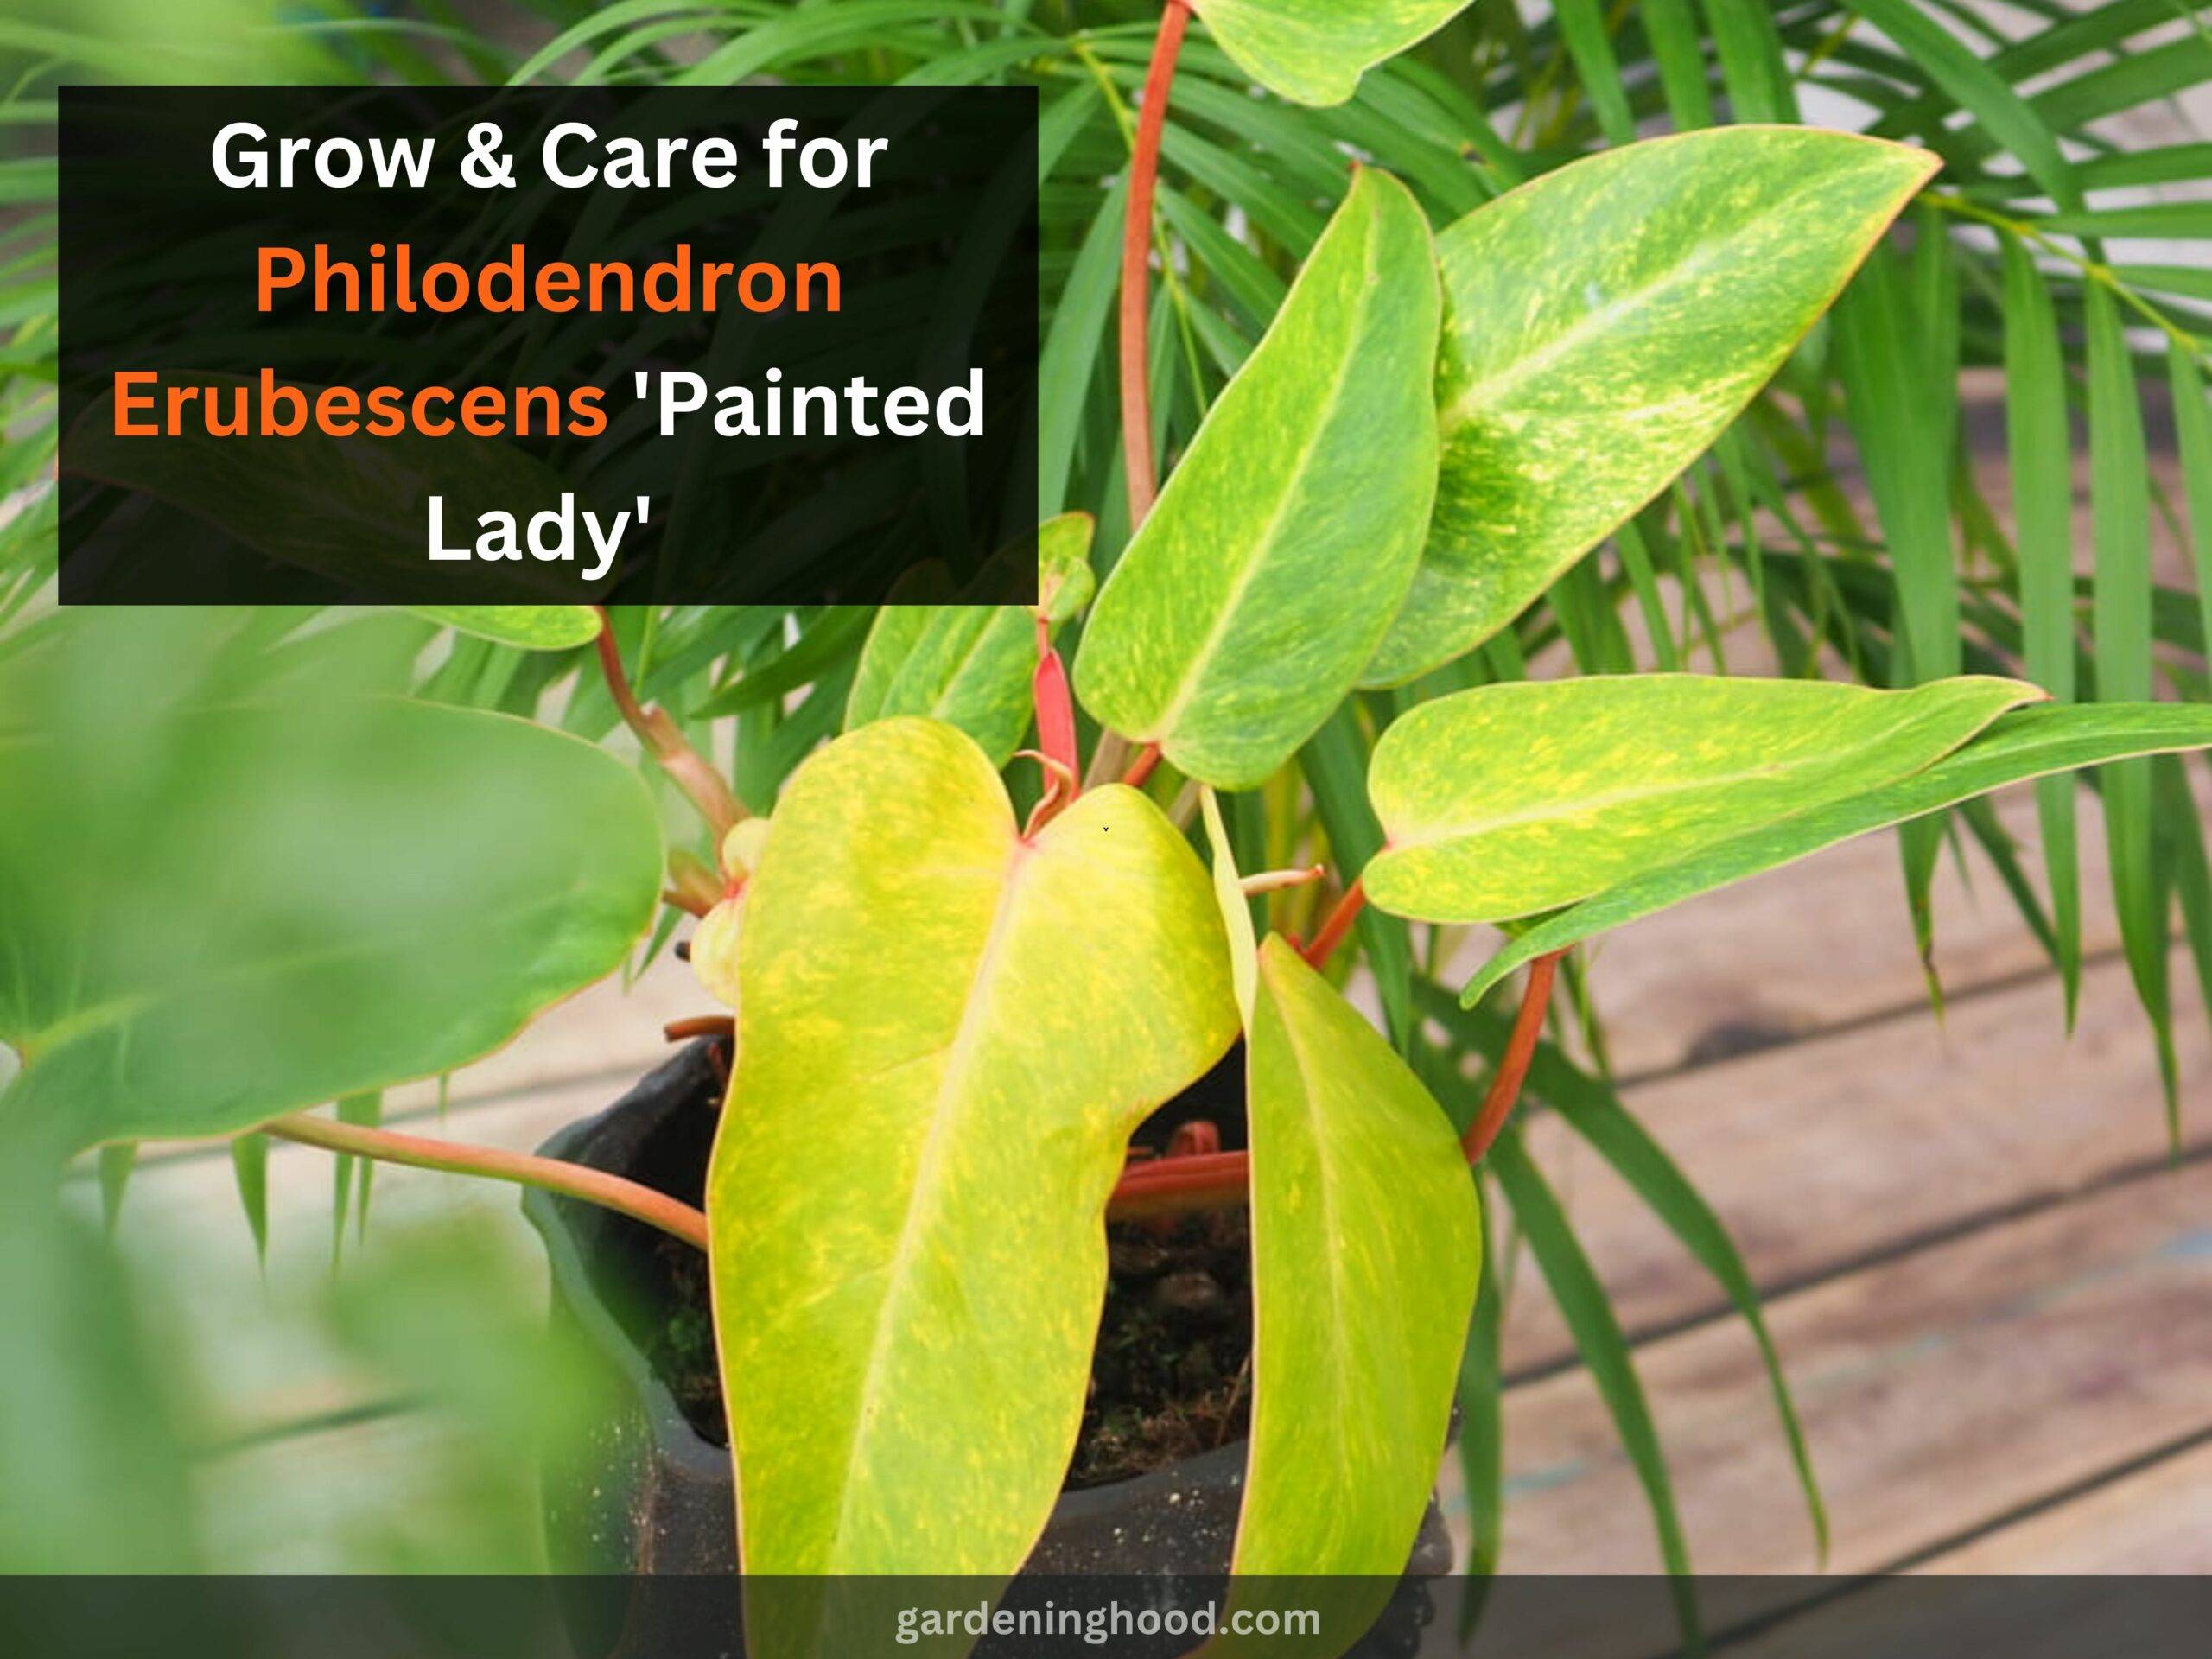 How to Grow & Care for Philodendron Erubescens 'Painted Lady' (2023)